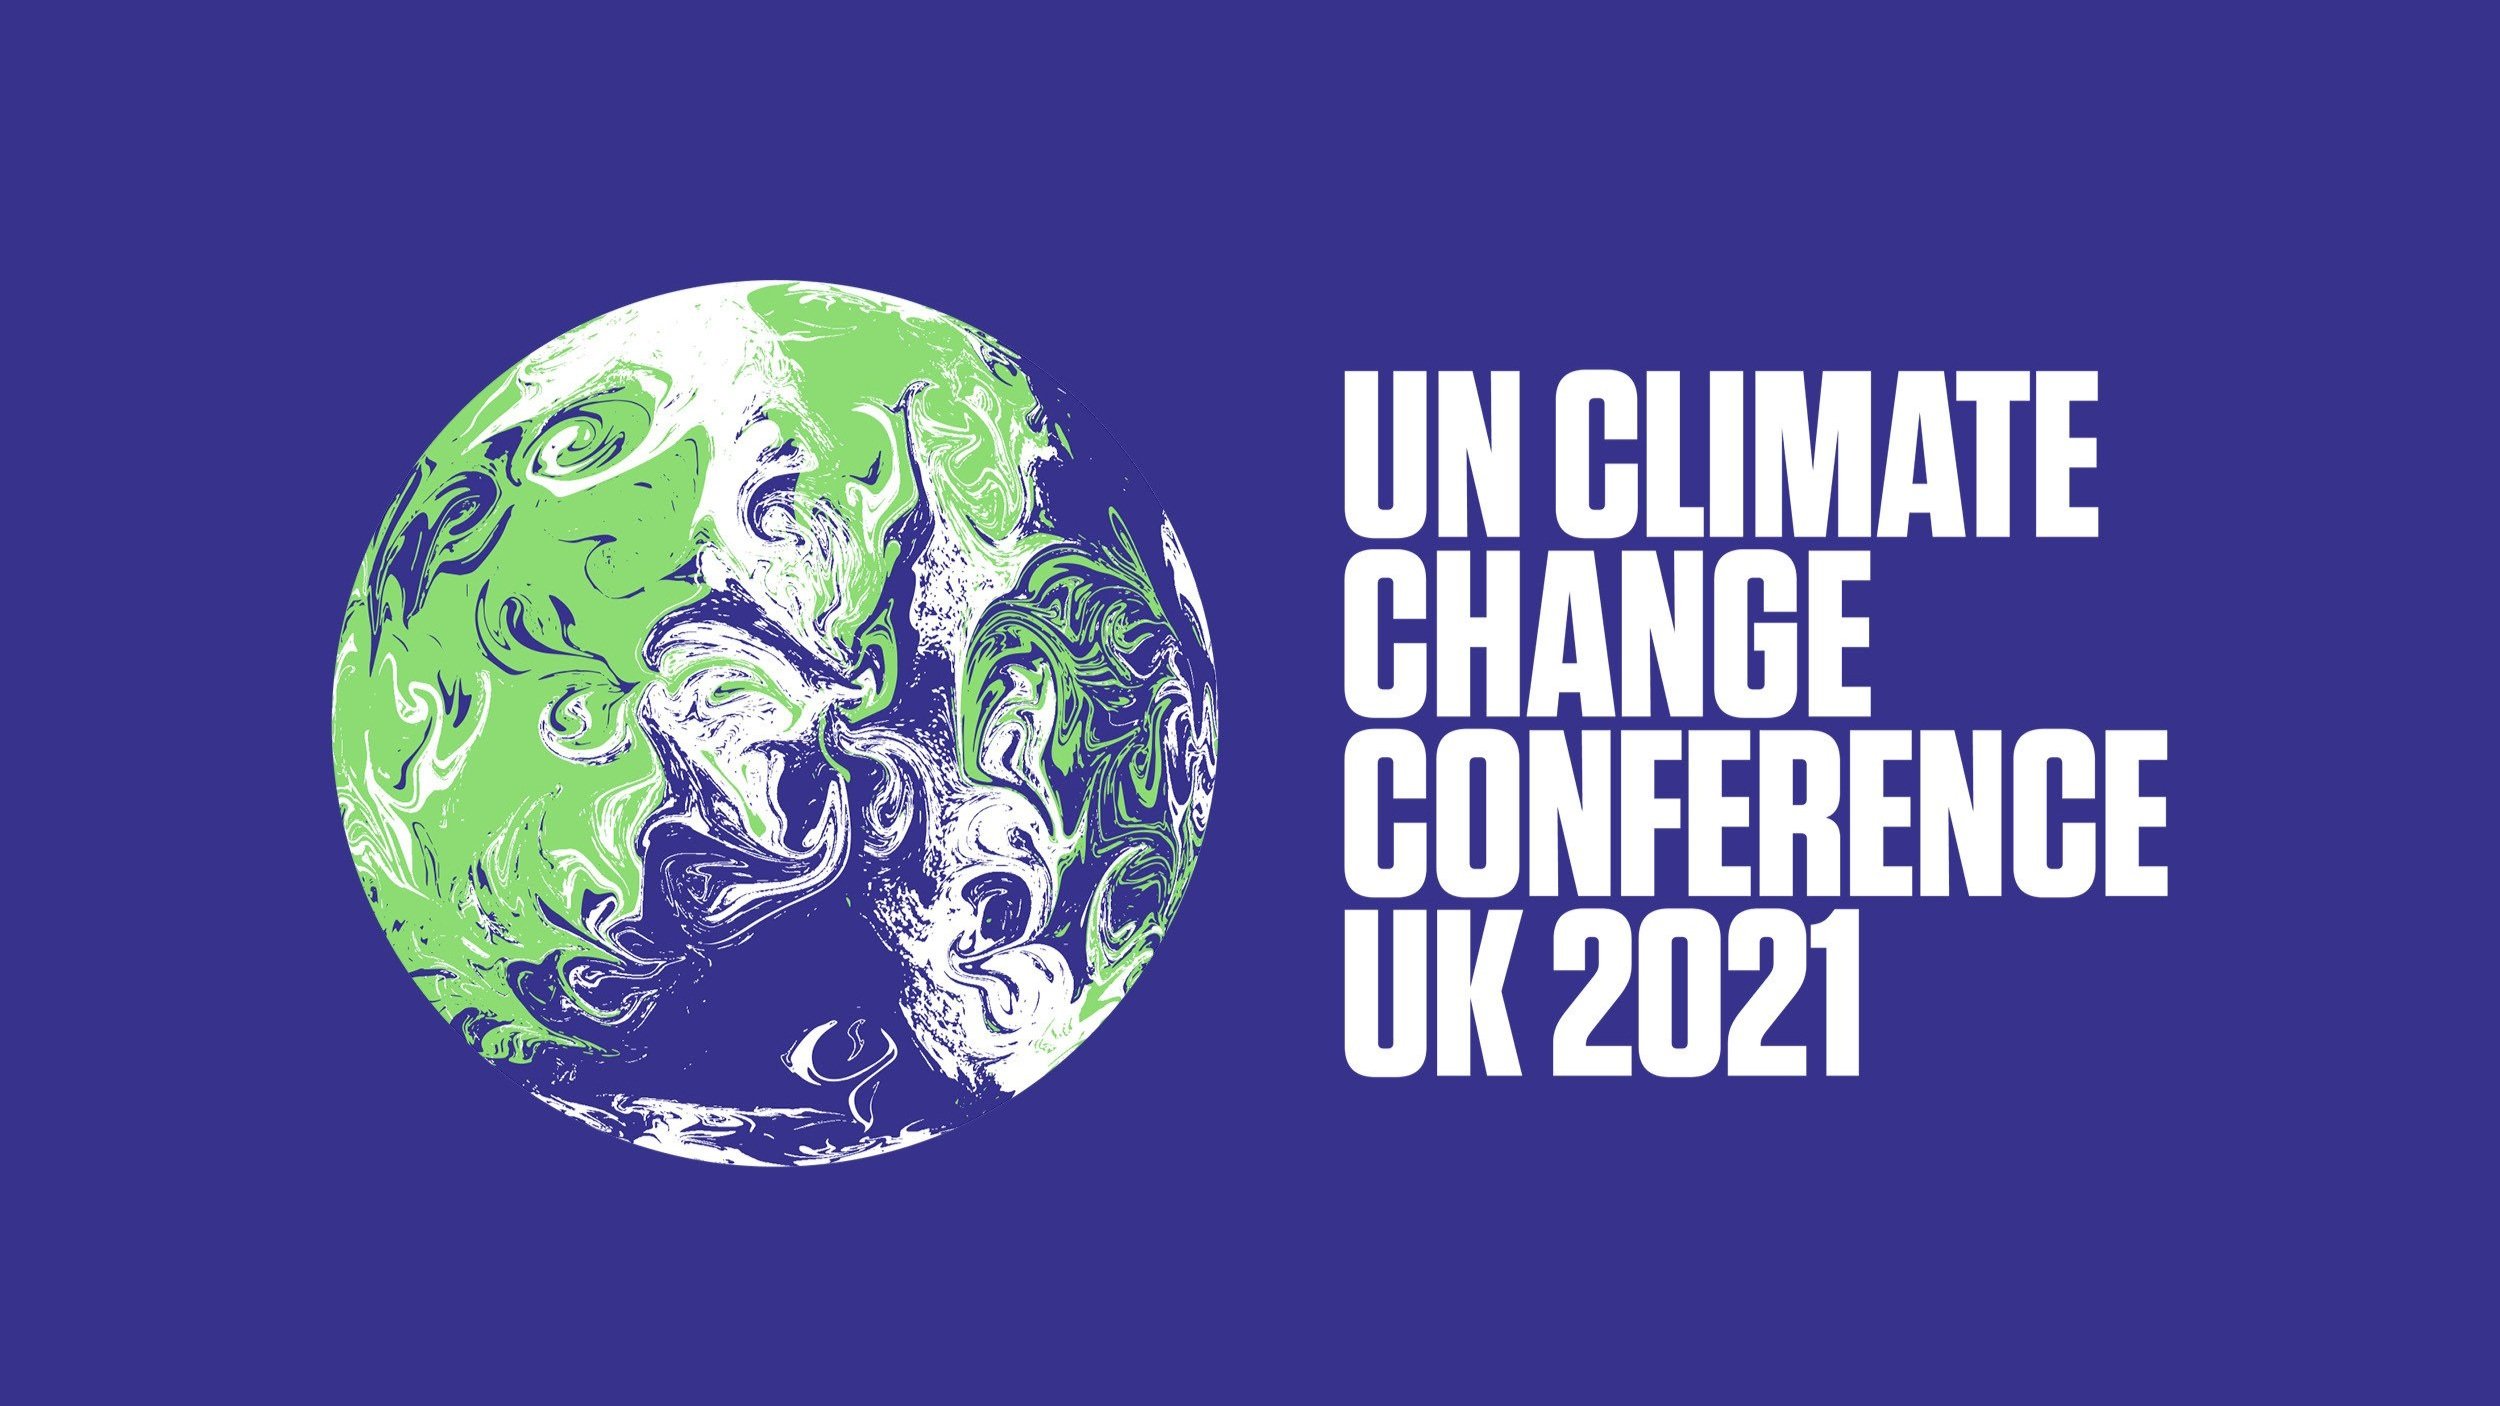 UN-Climate-Change-Conference-UK2021-by-Johnson-Banks-3.jpg